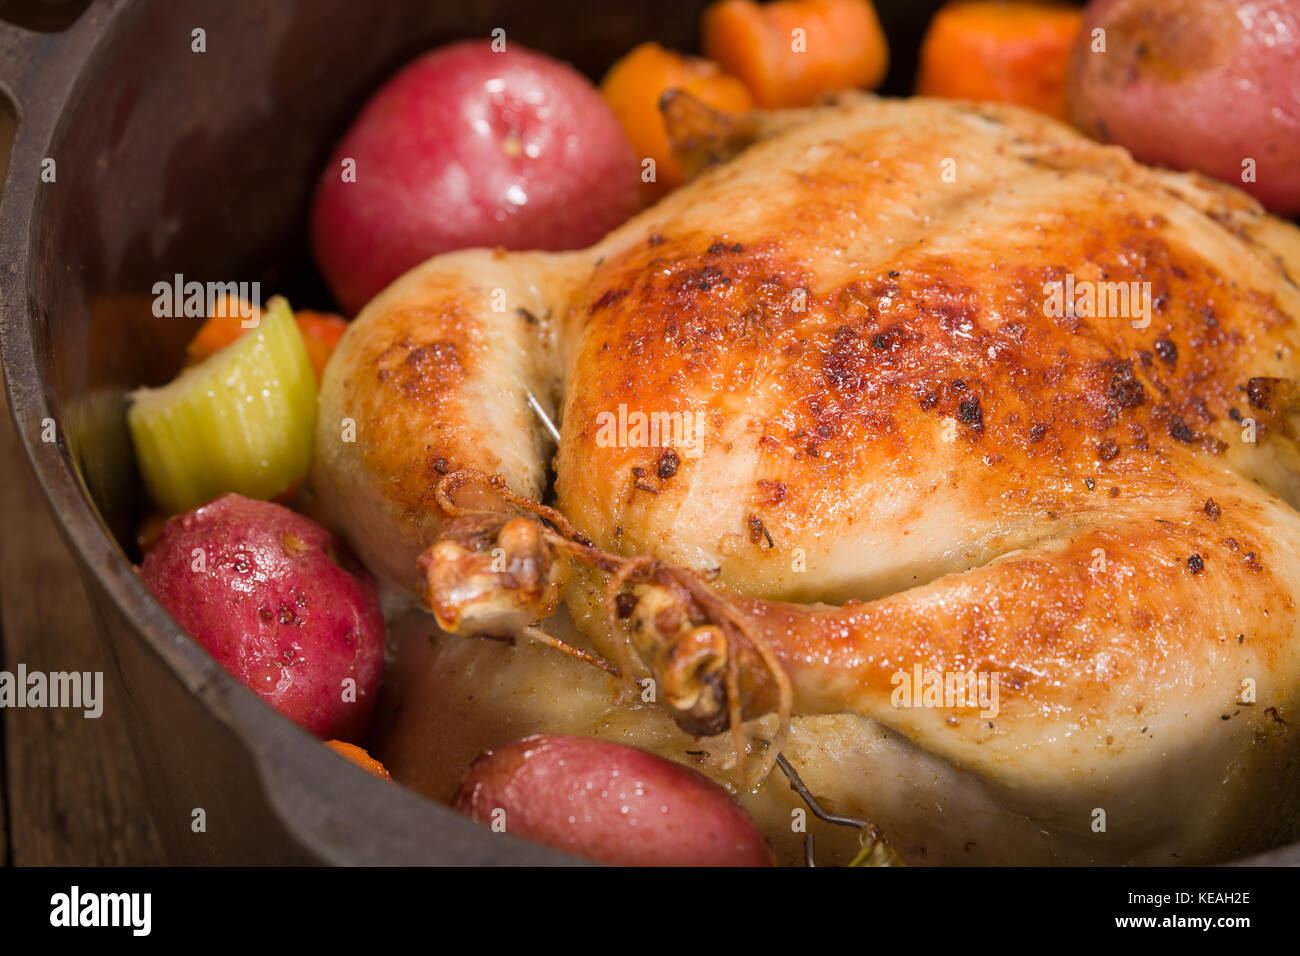 Dutch-style roasted chicken with baked red potatoes, carrots and celery, in a cast iron pot on a rustic wood table Stock Photo